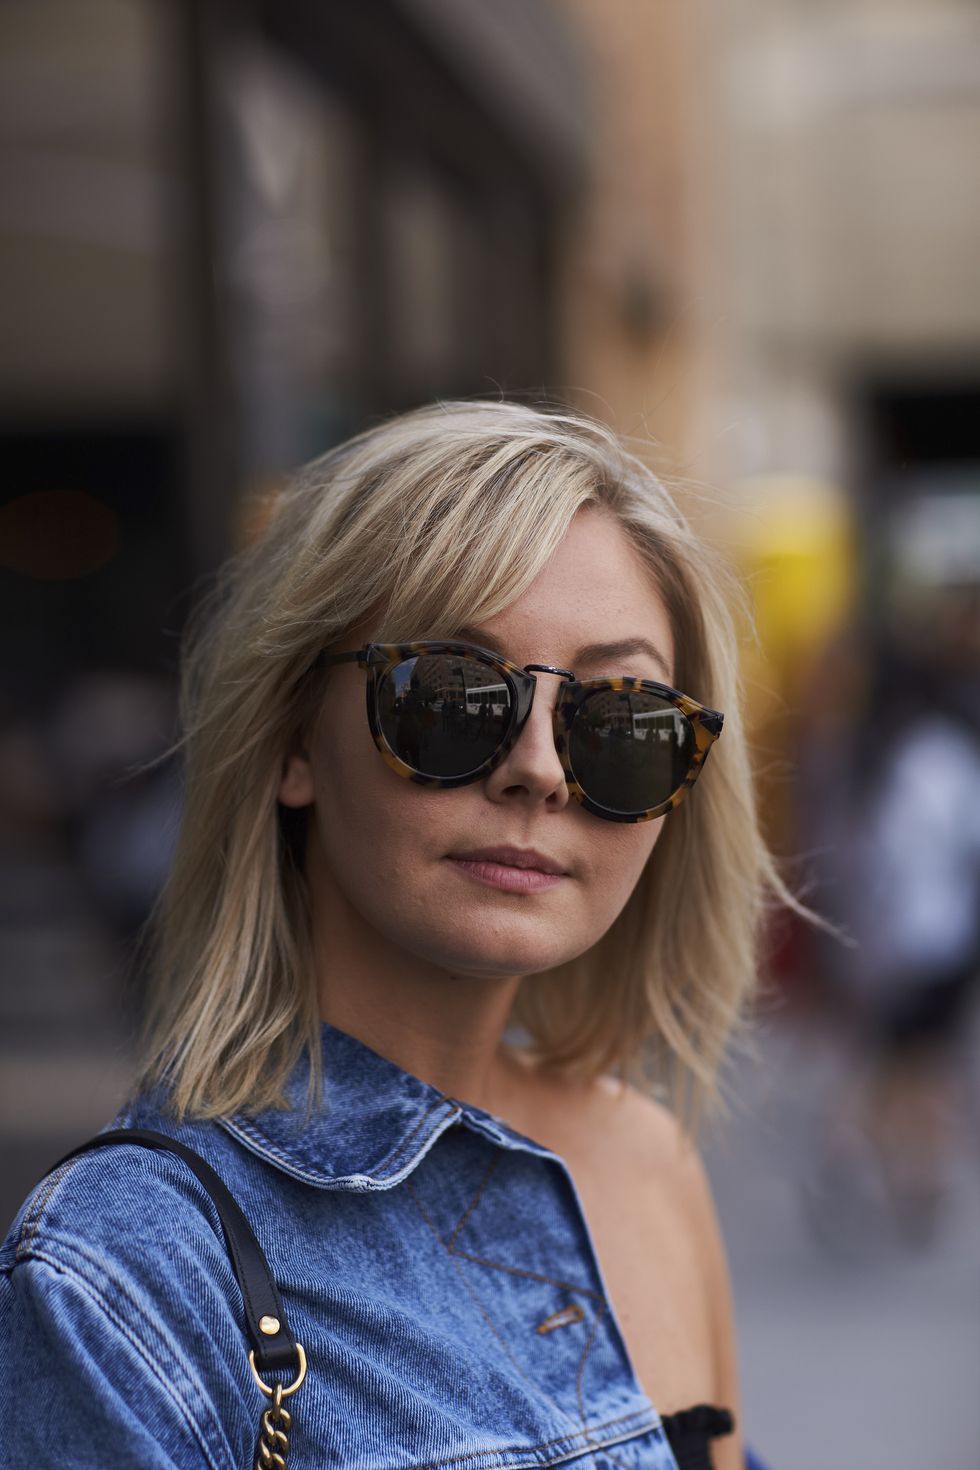 Eyewear, Hair, Sunglasses, Face, Street fashion, Cool, Glasses, Blond, Hairstyle, Beauty, 